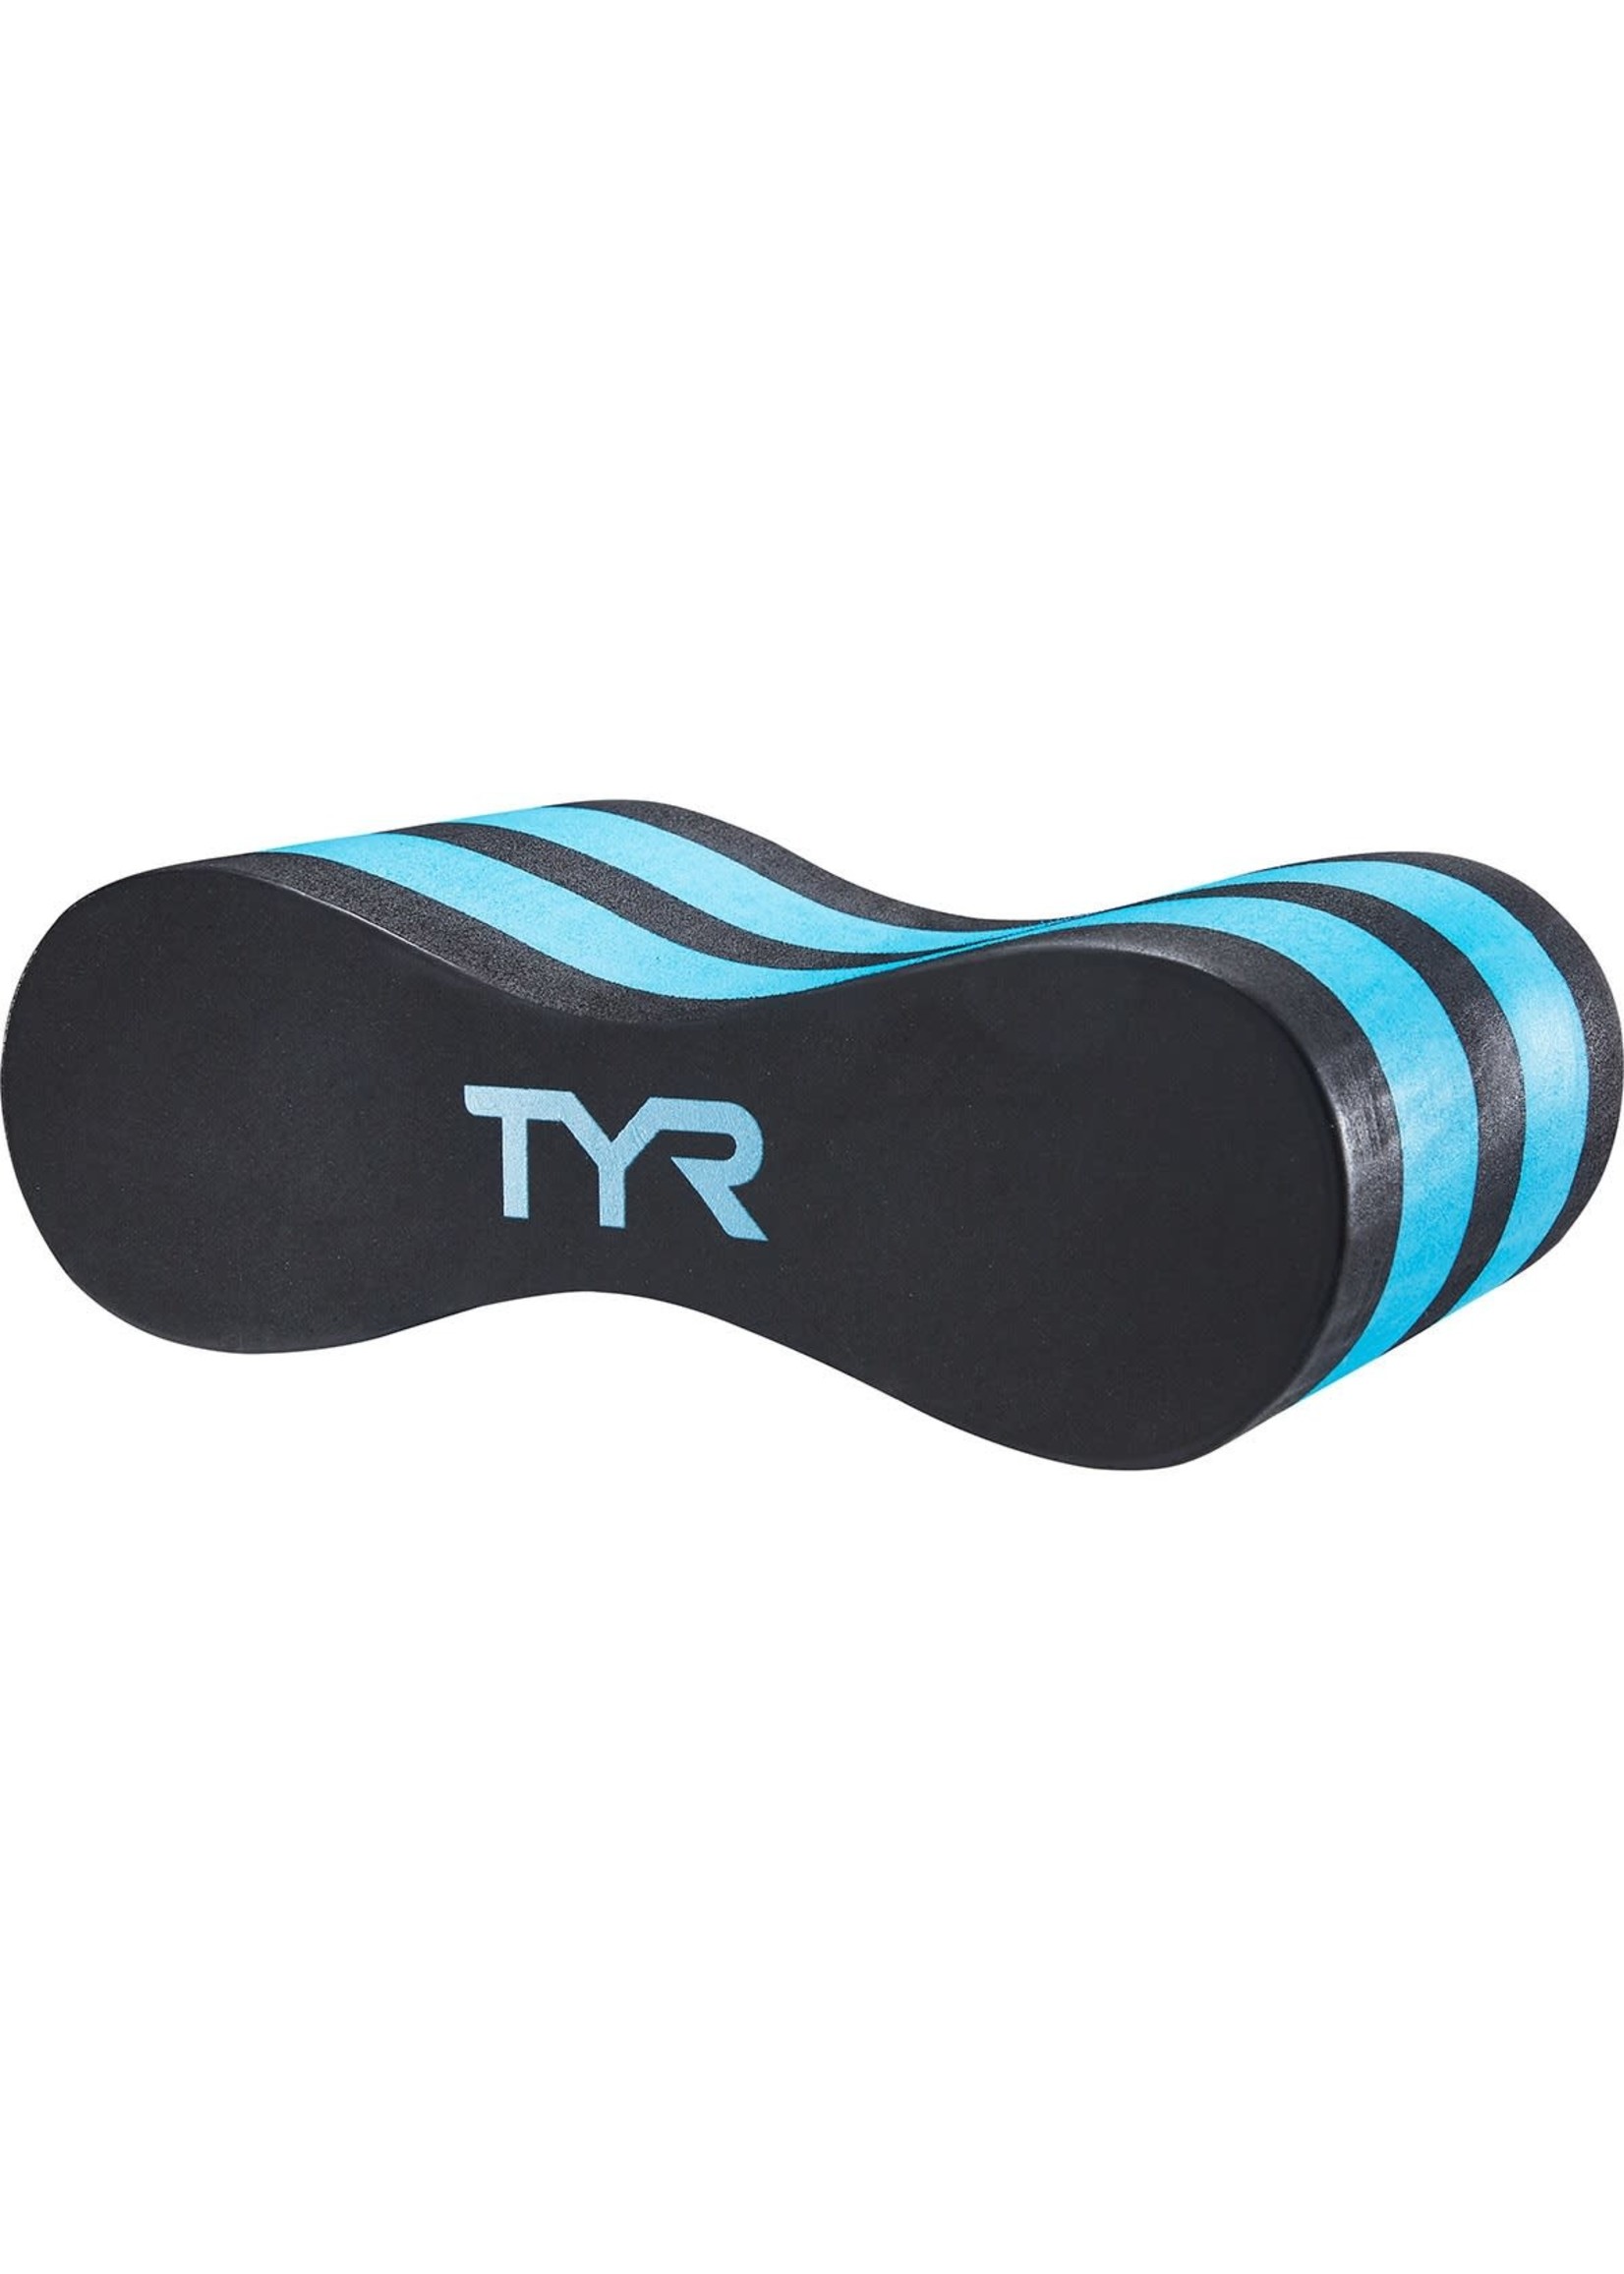 TYR Pull Float Classic